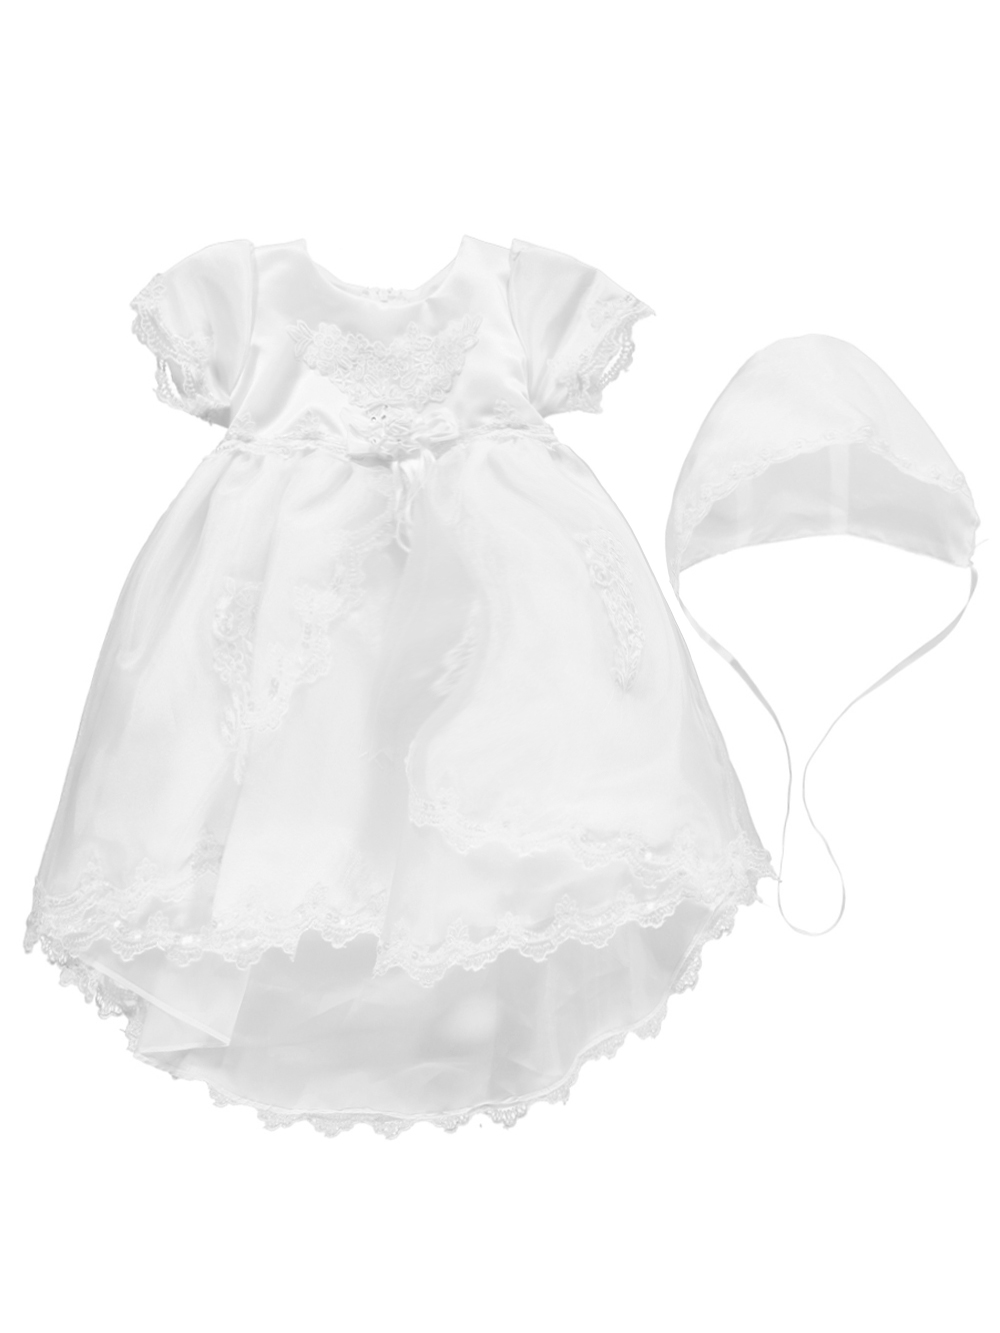 Chic Baby Baptism and Christening